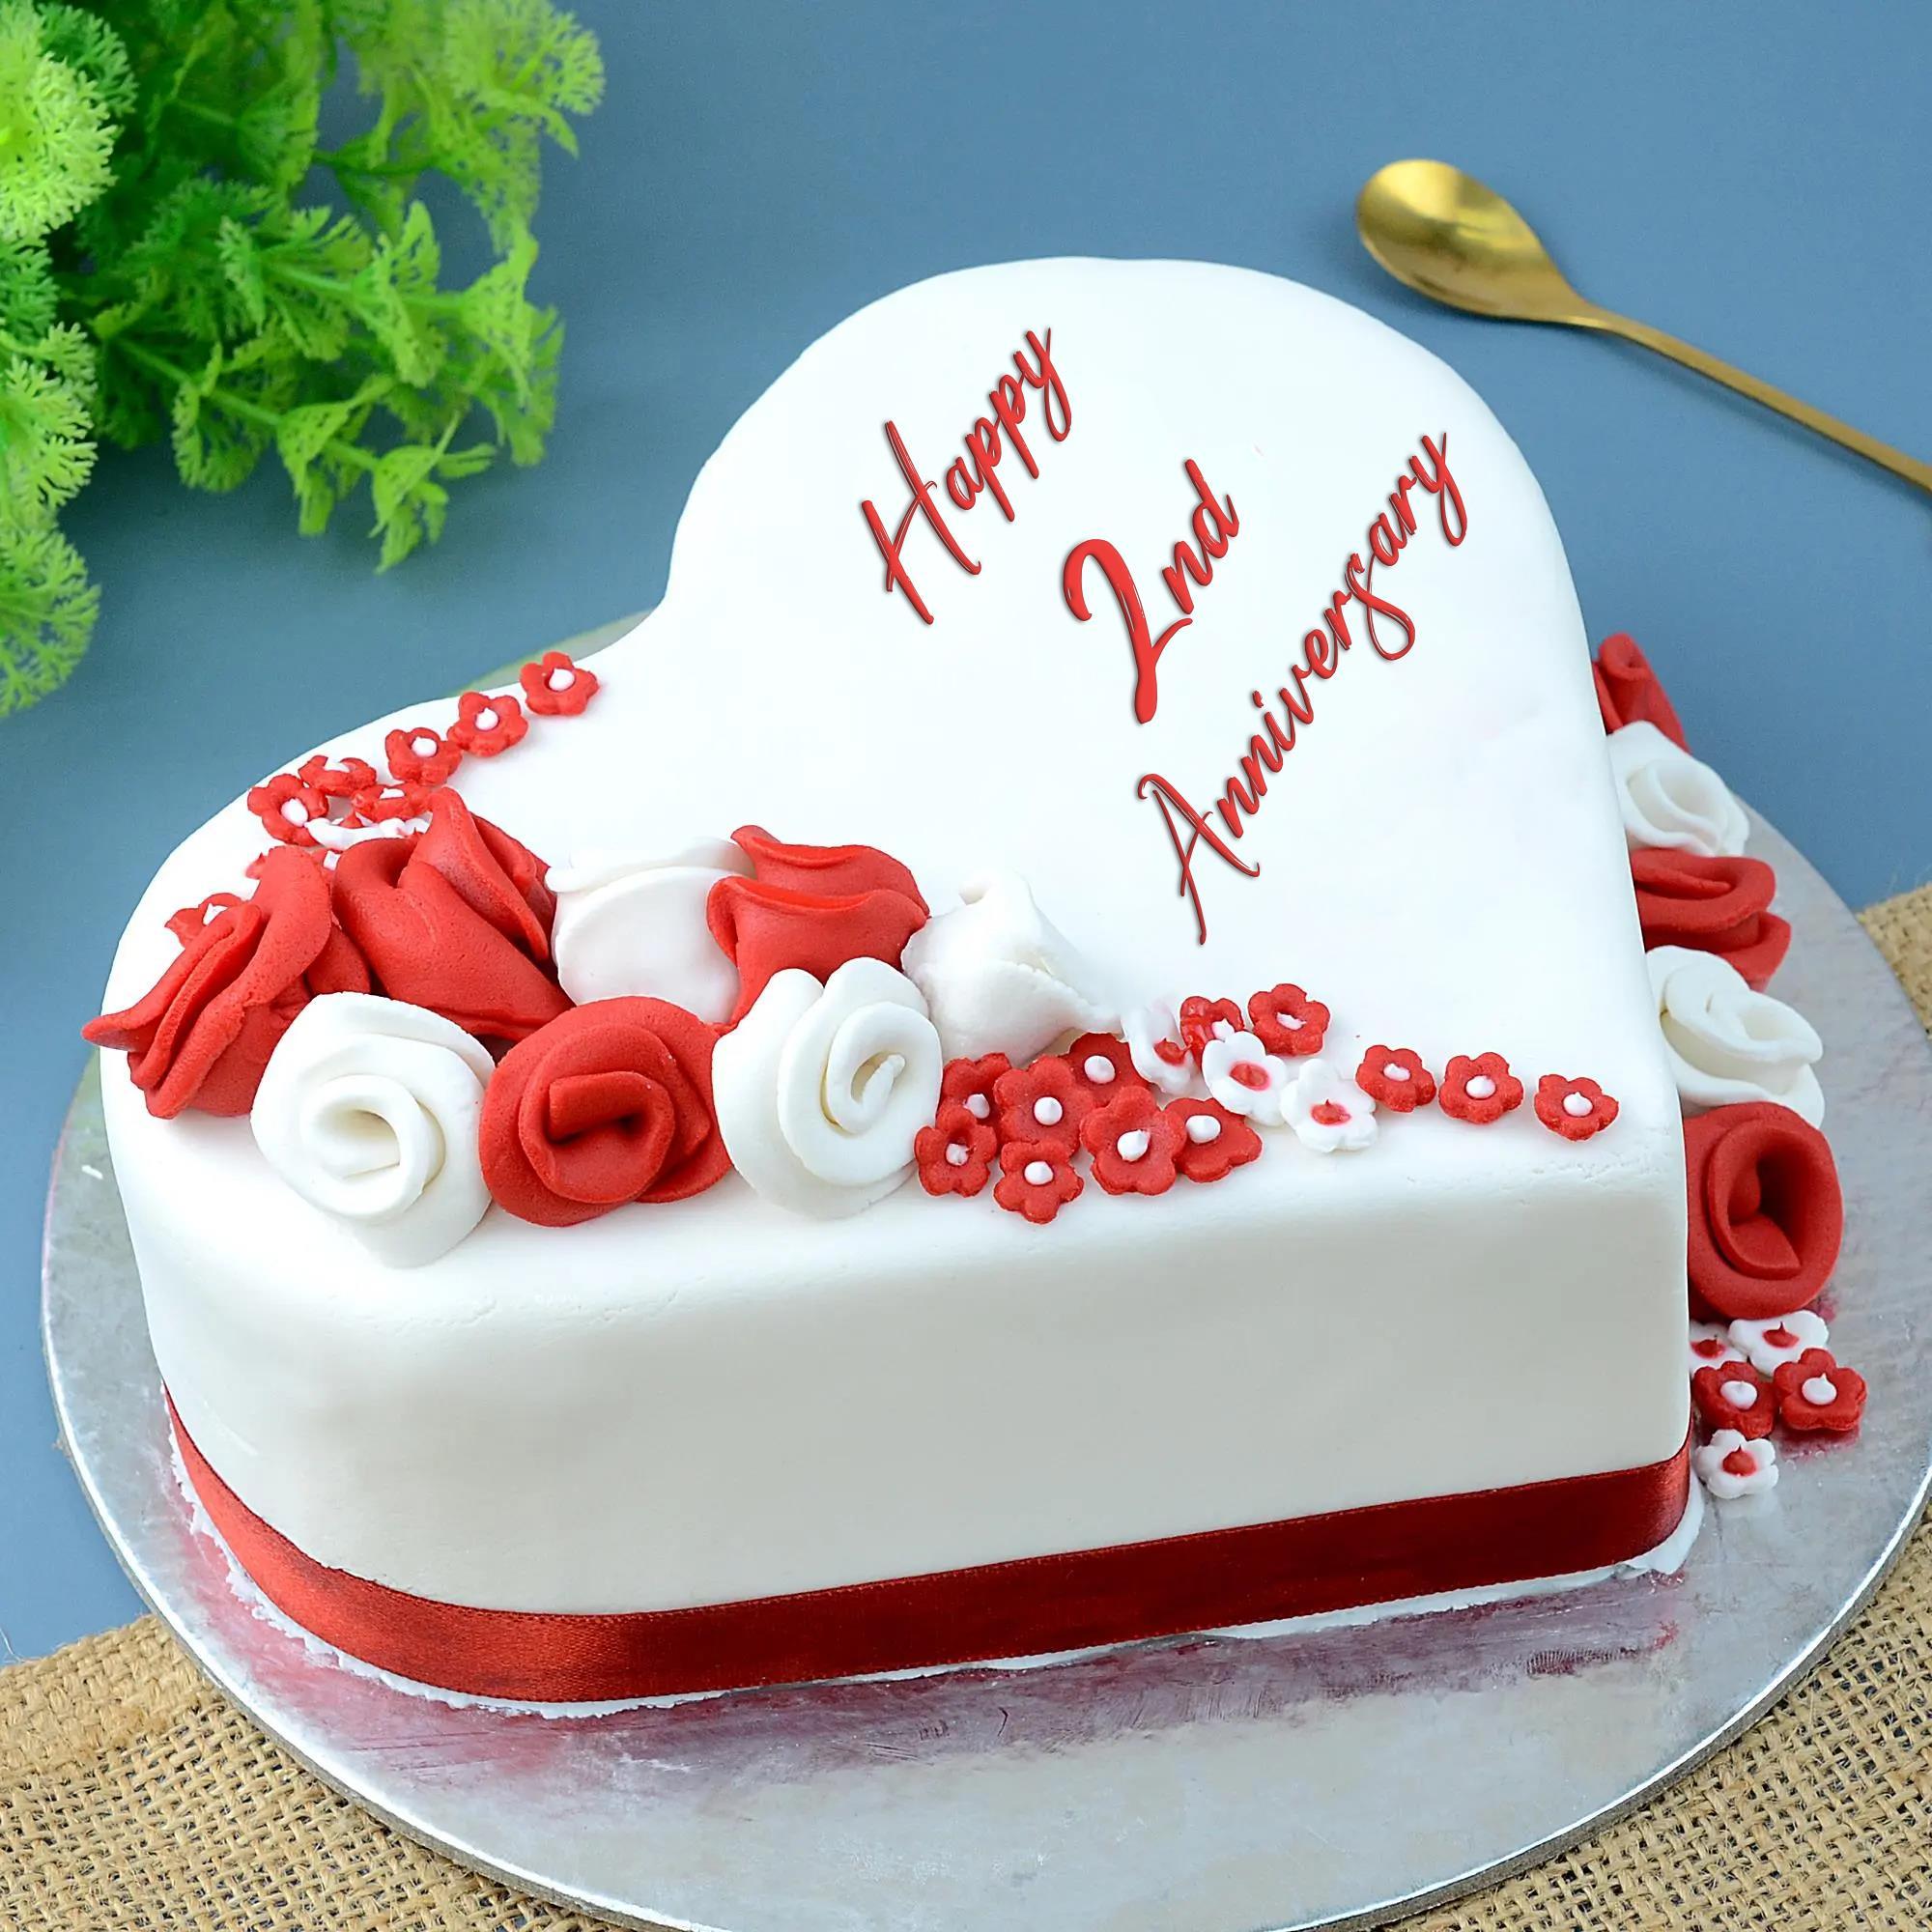 Wedding Anniversary Wishes Cake Images With Name